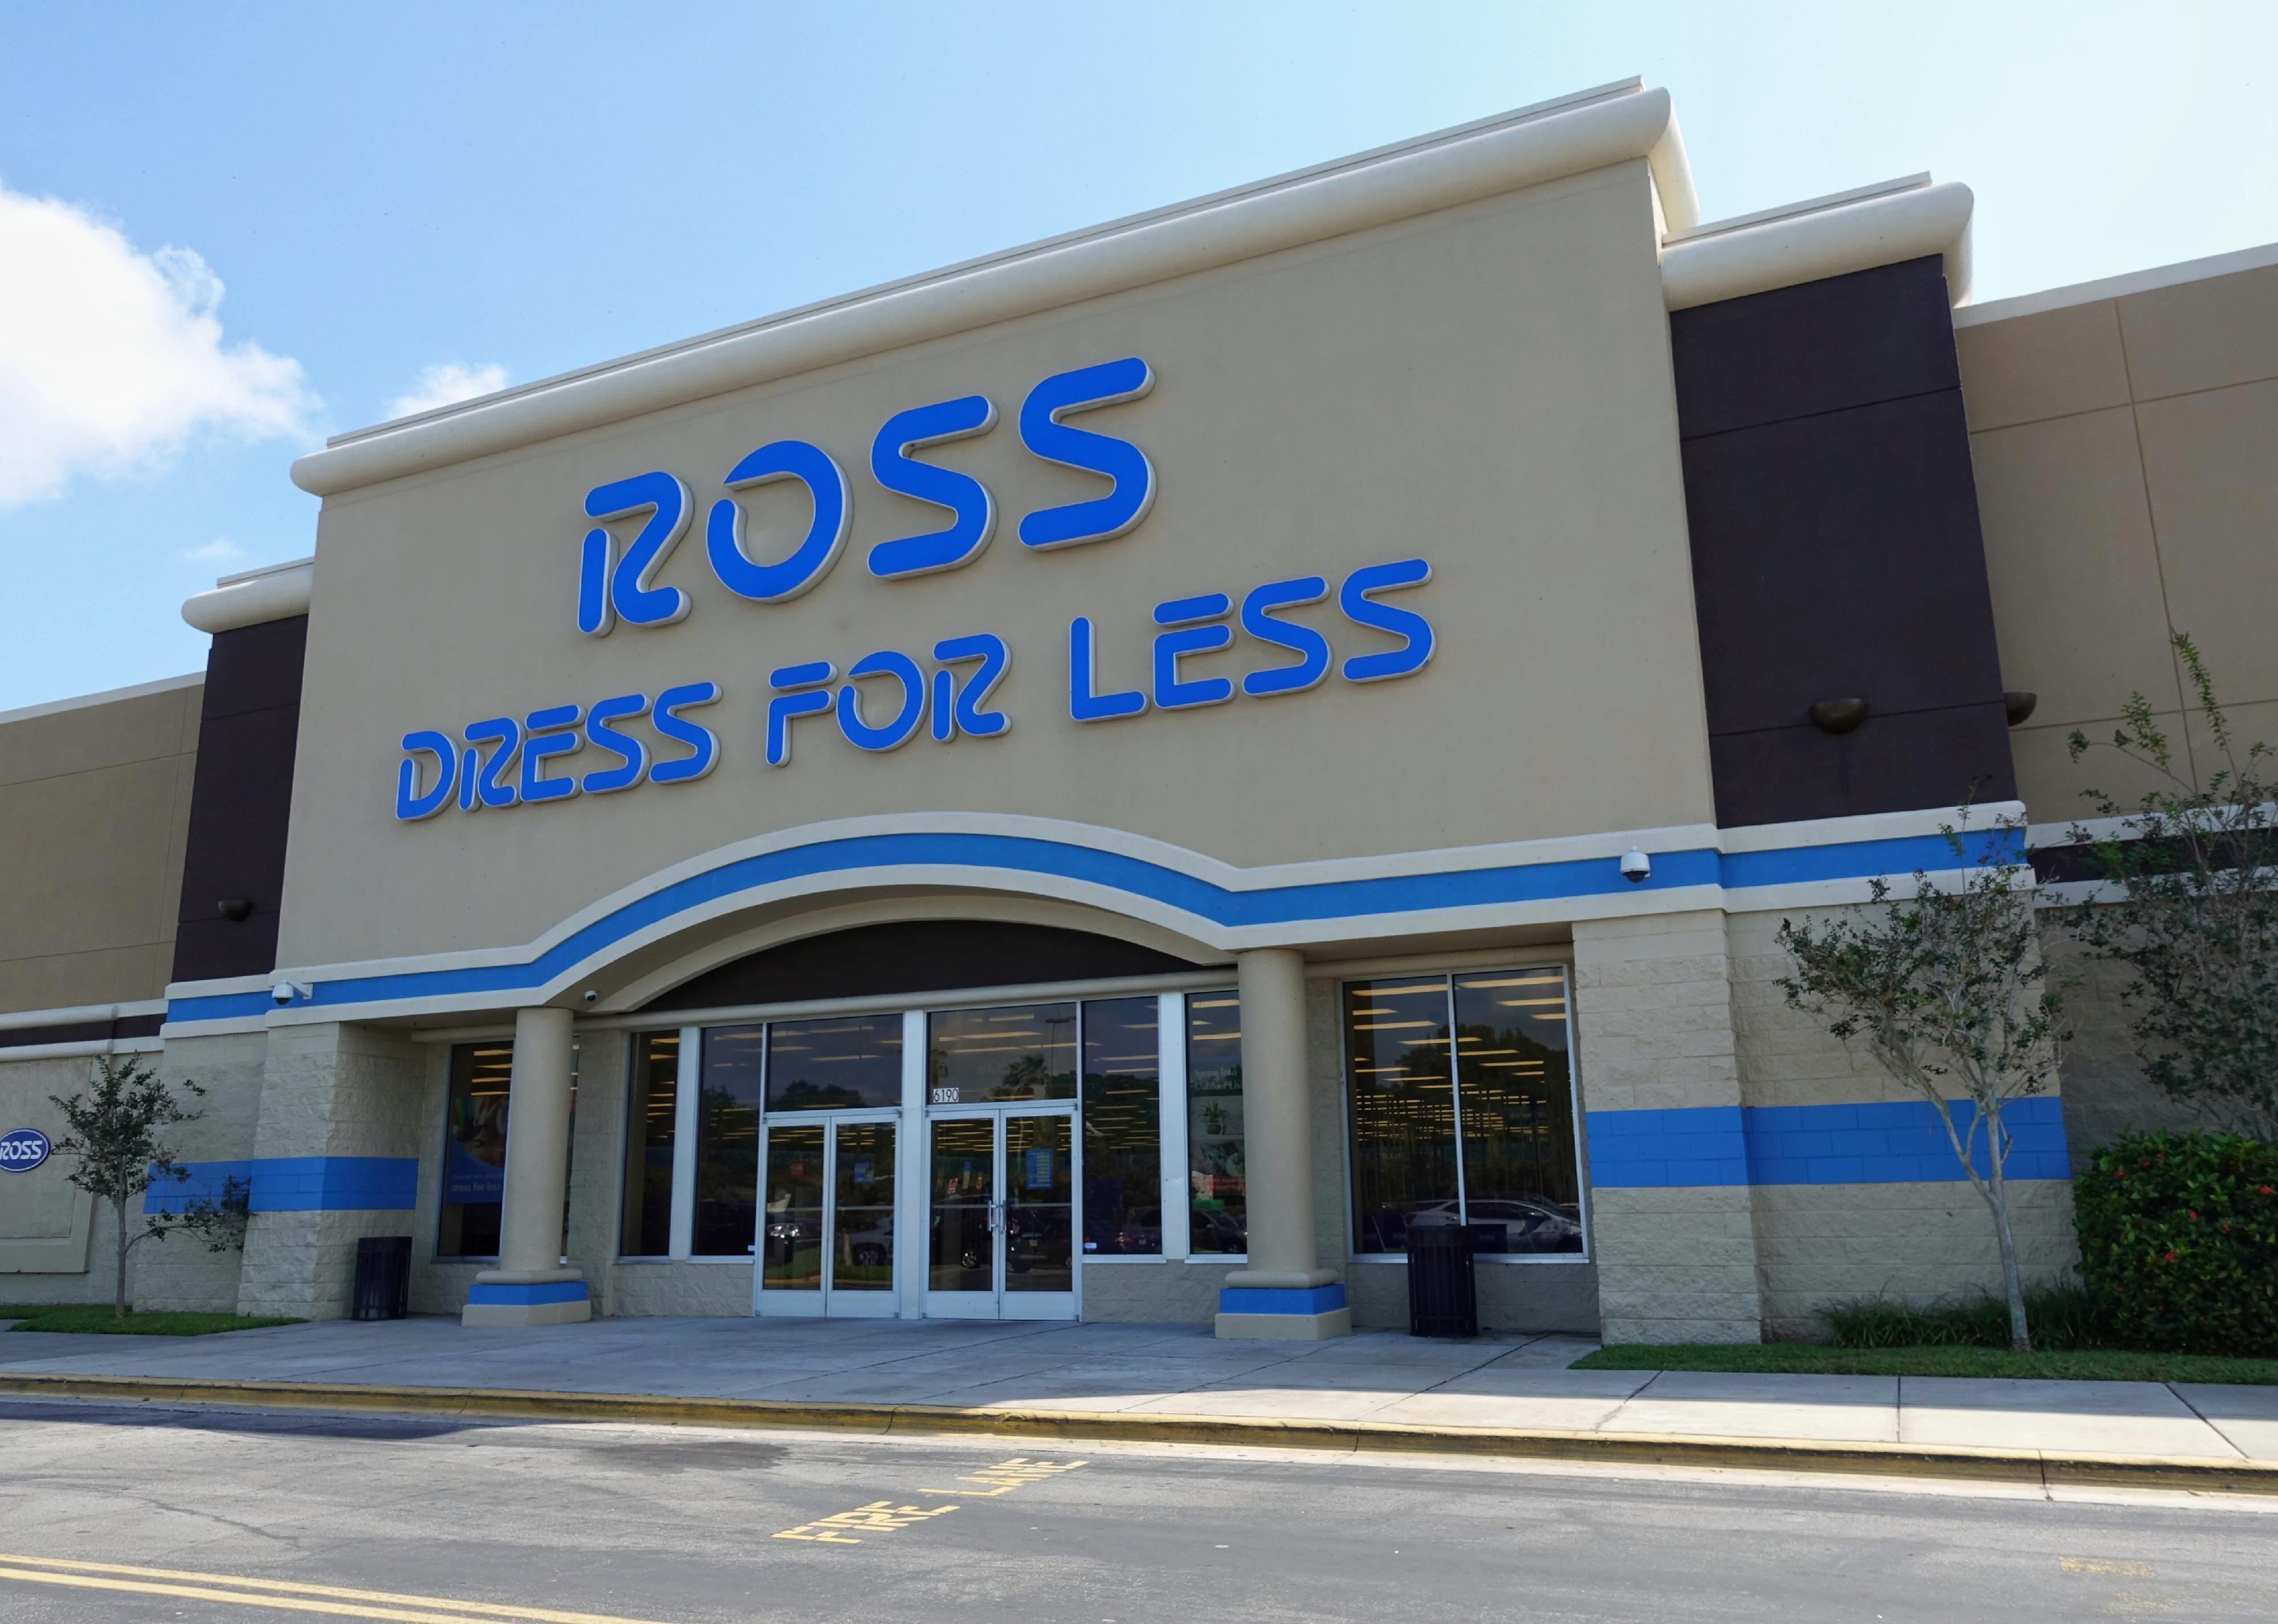 The exterior of a Ross store with big blue letters.